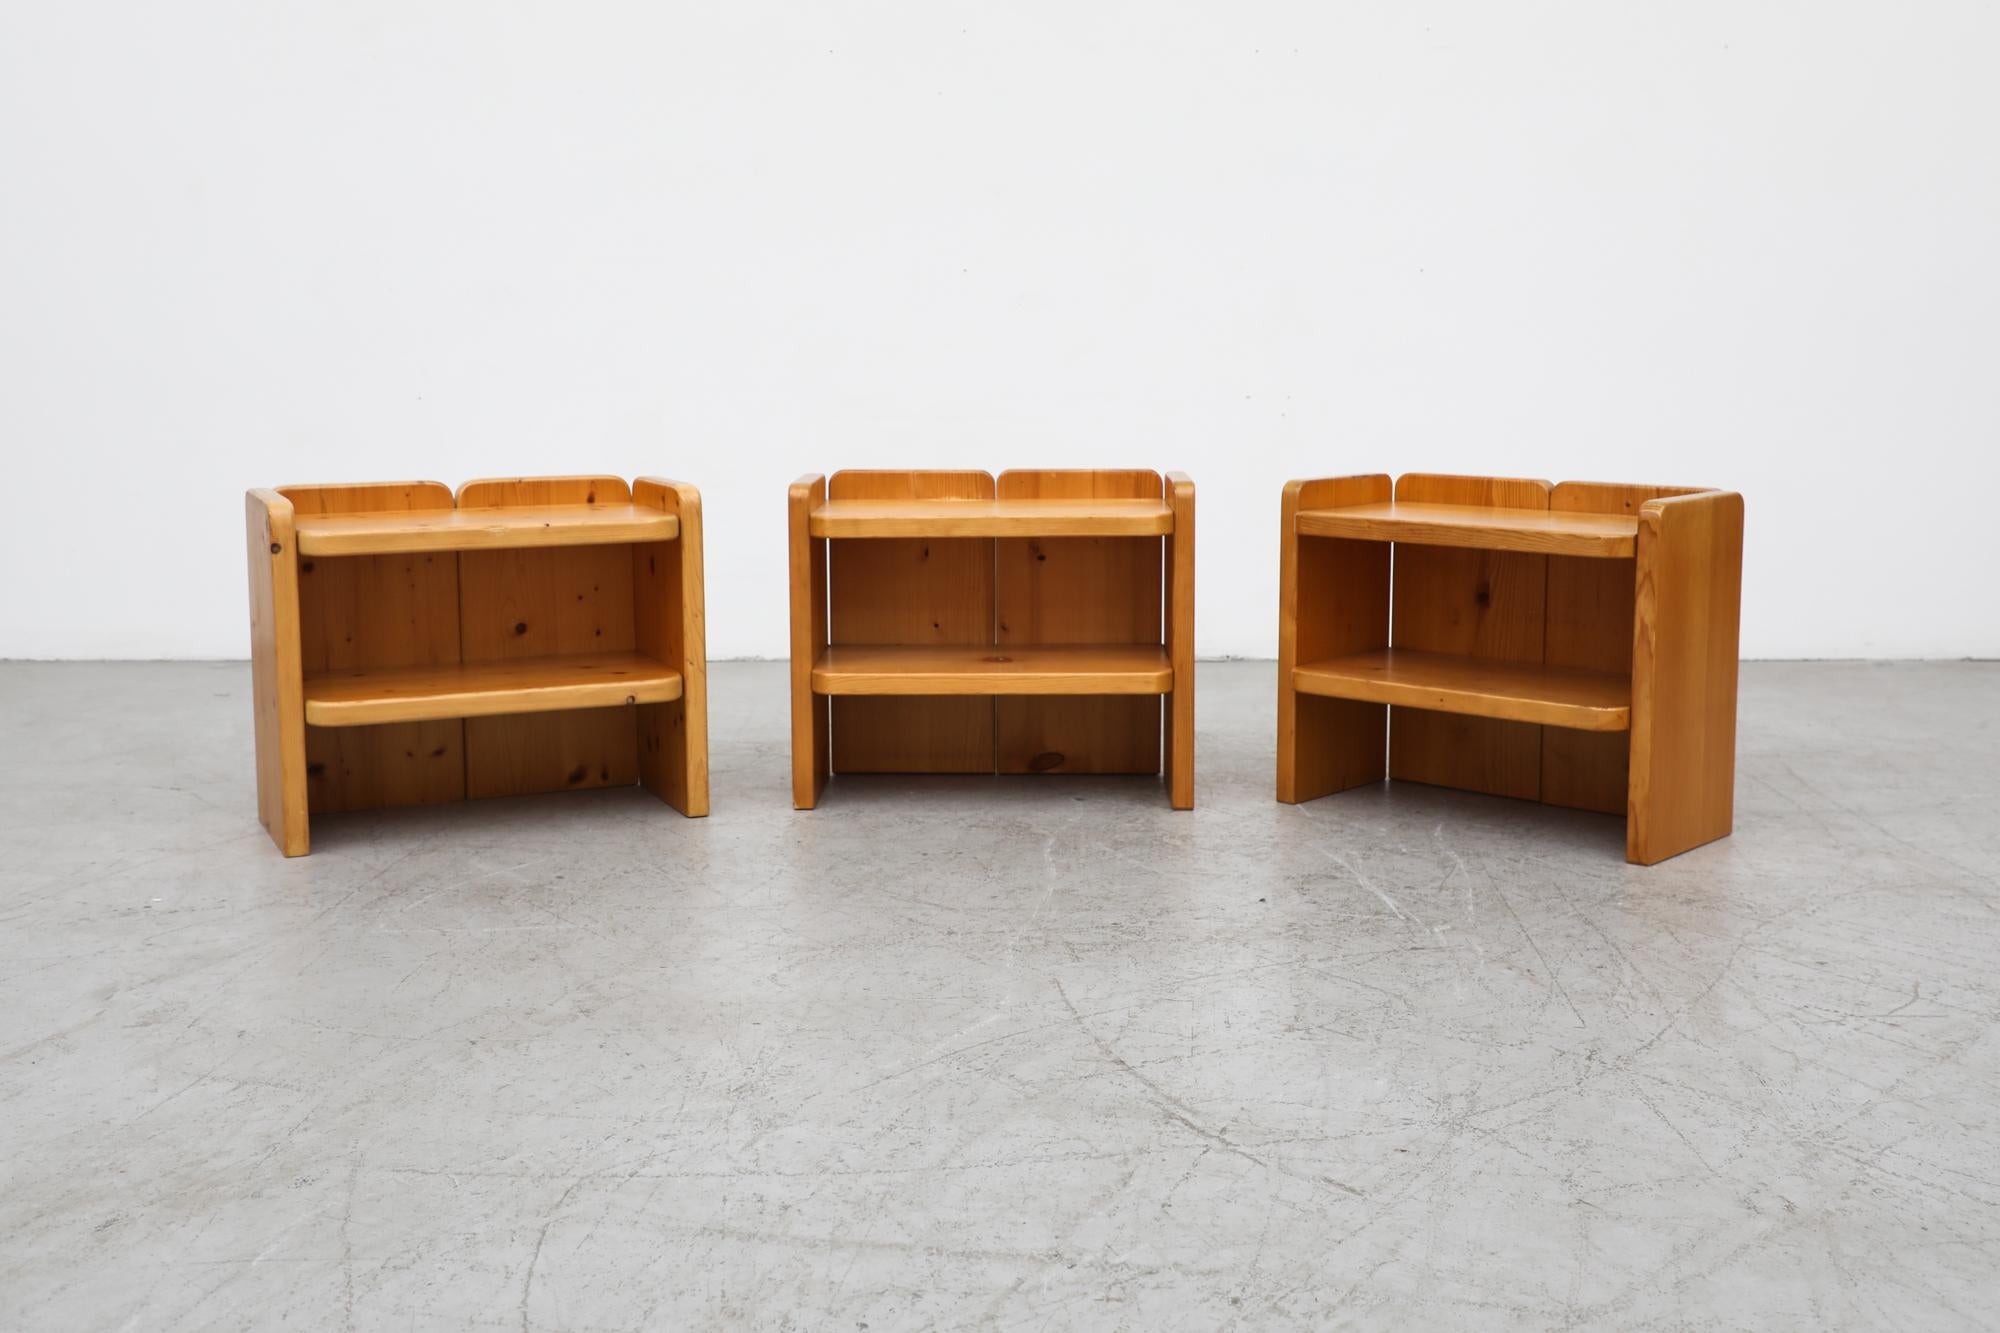 Ate Van Apeldoorn pine nightstands. These can be used as little bookshelves or vanity stools. In original condition with some visible wear consistent with their age and use. Sold individually.